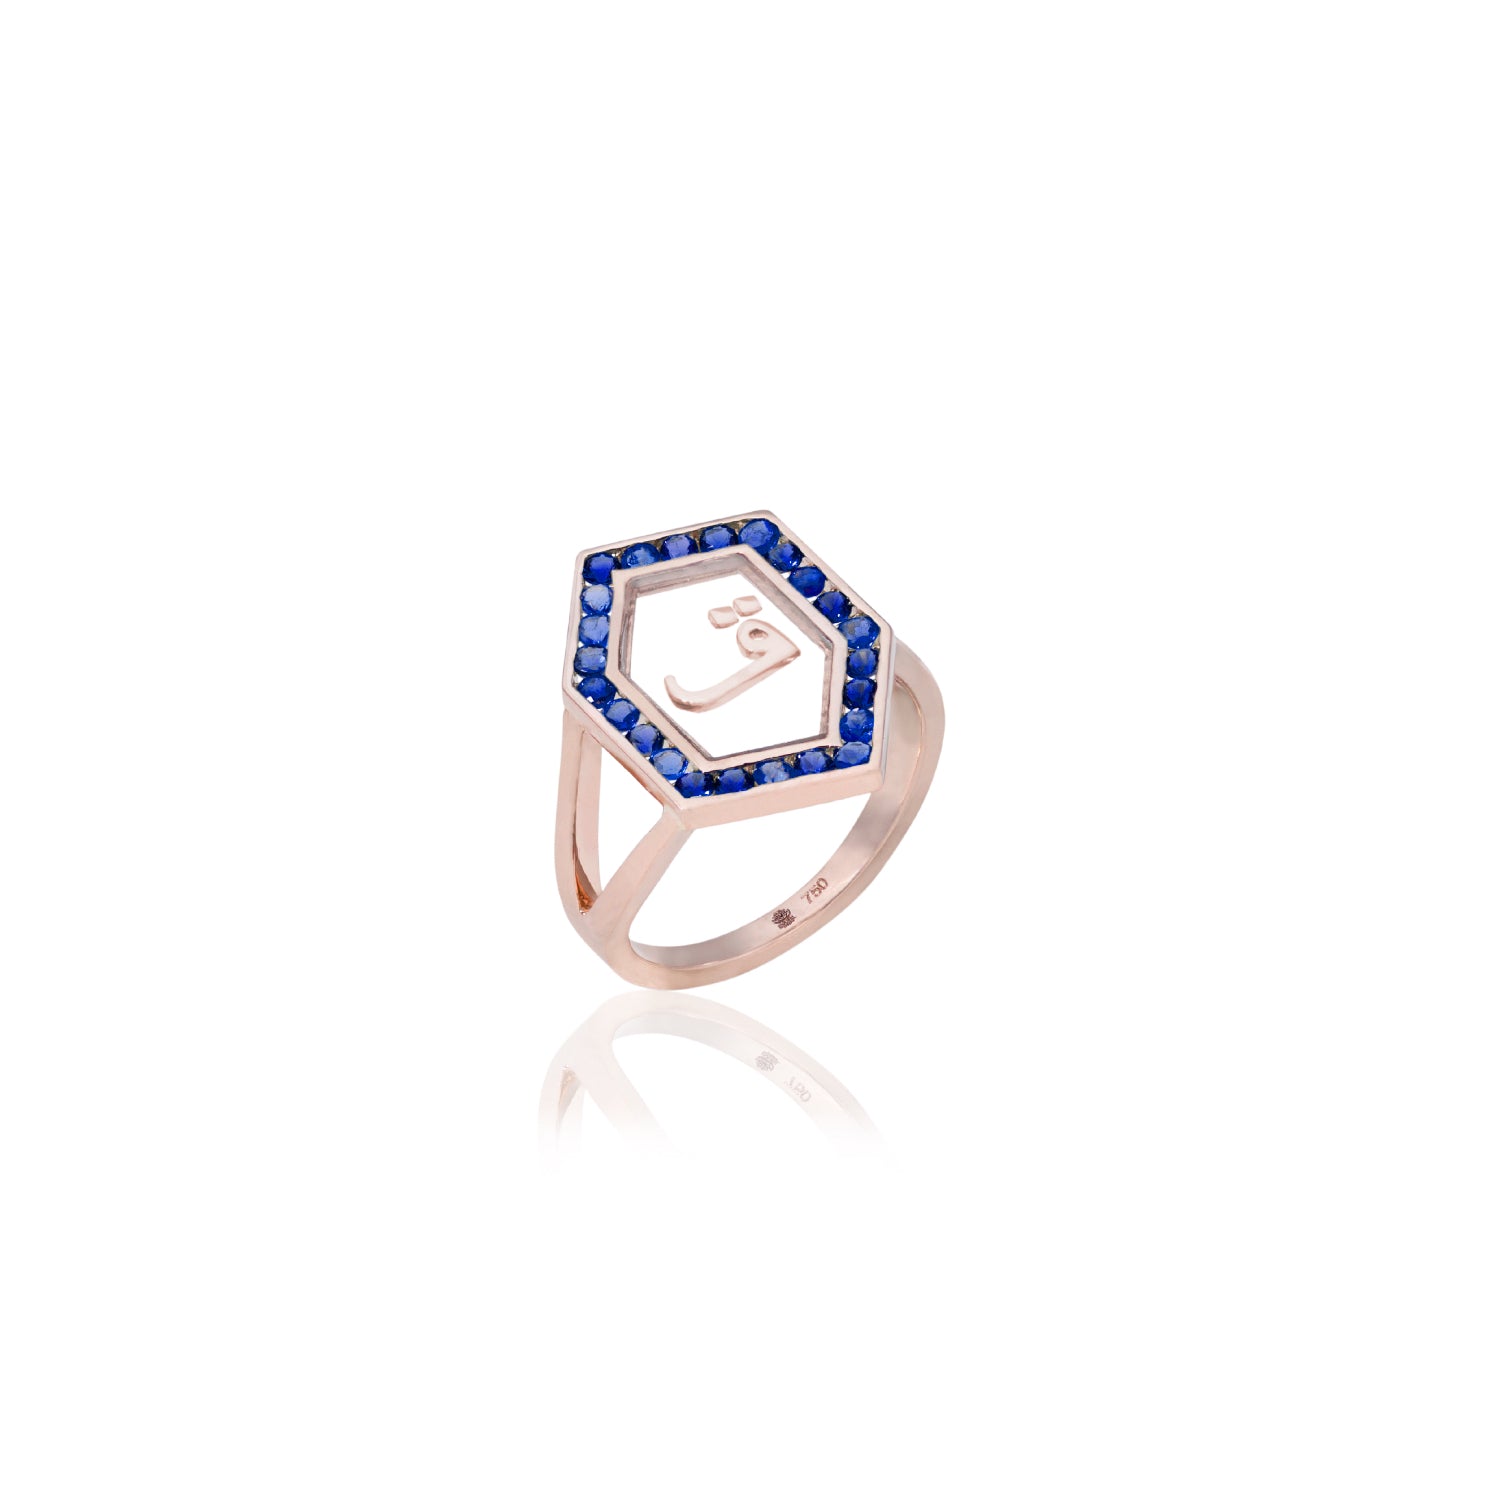 Qamoos 1.0 Letter ق Sapphire Ring in Rose Gold